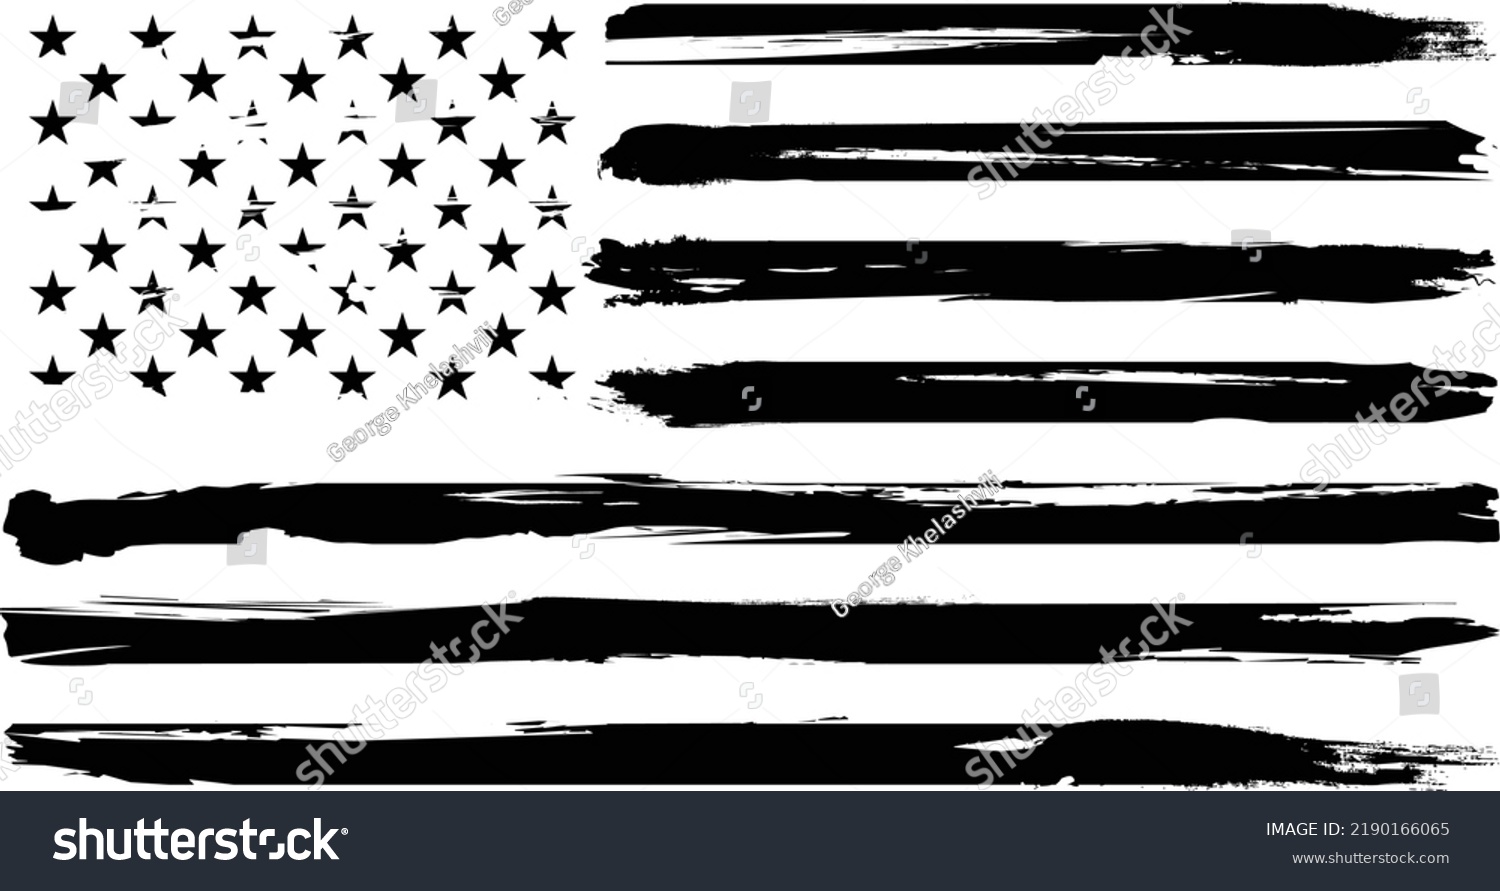 SVG of Vector Of The Distressed American Flag svg